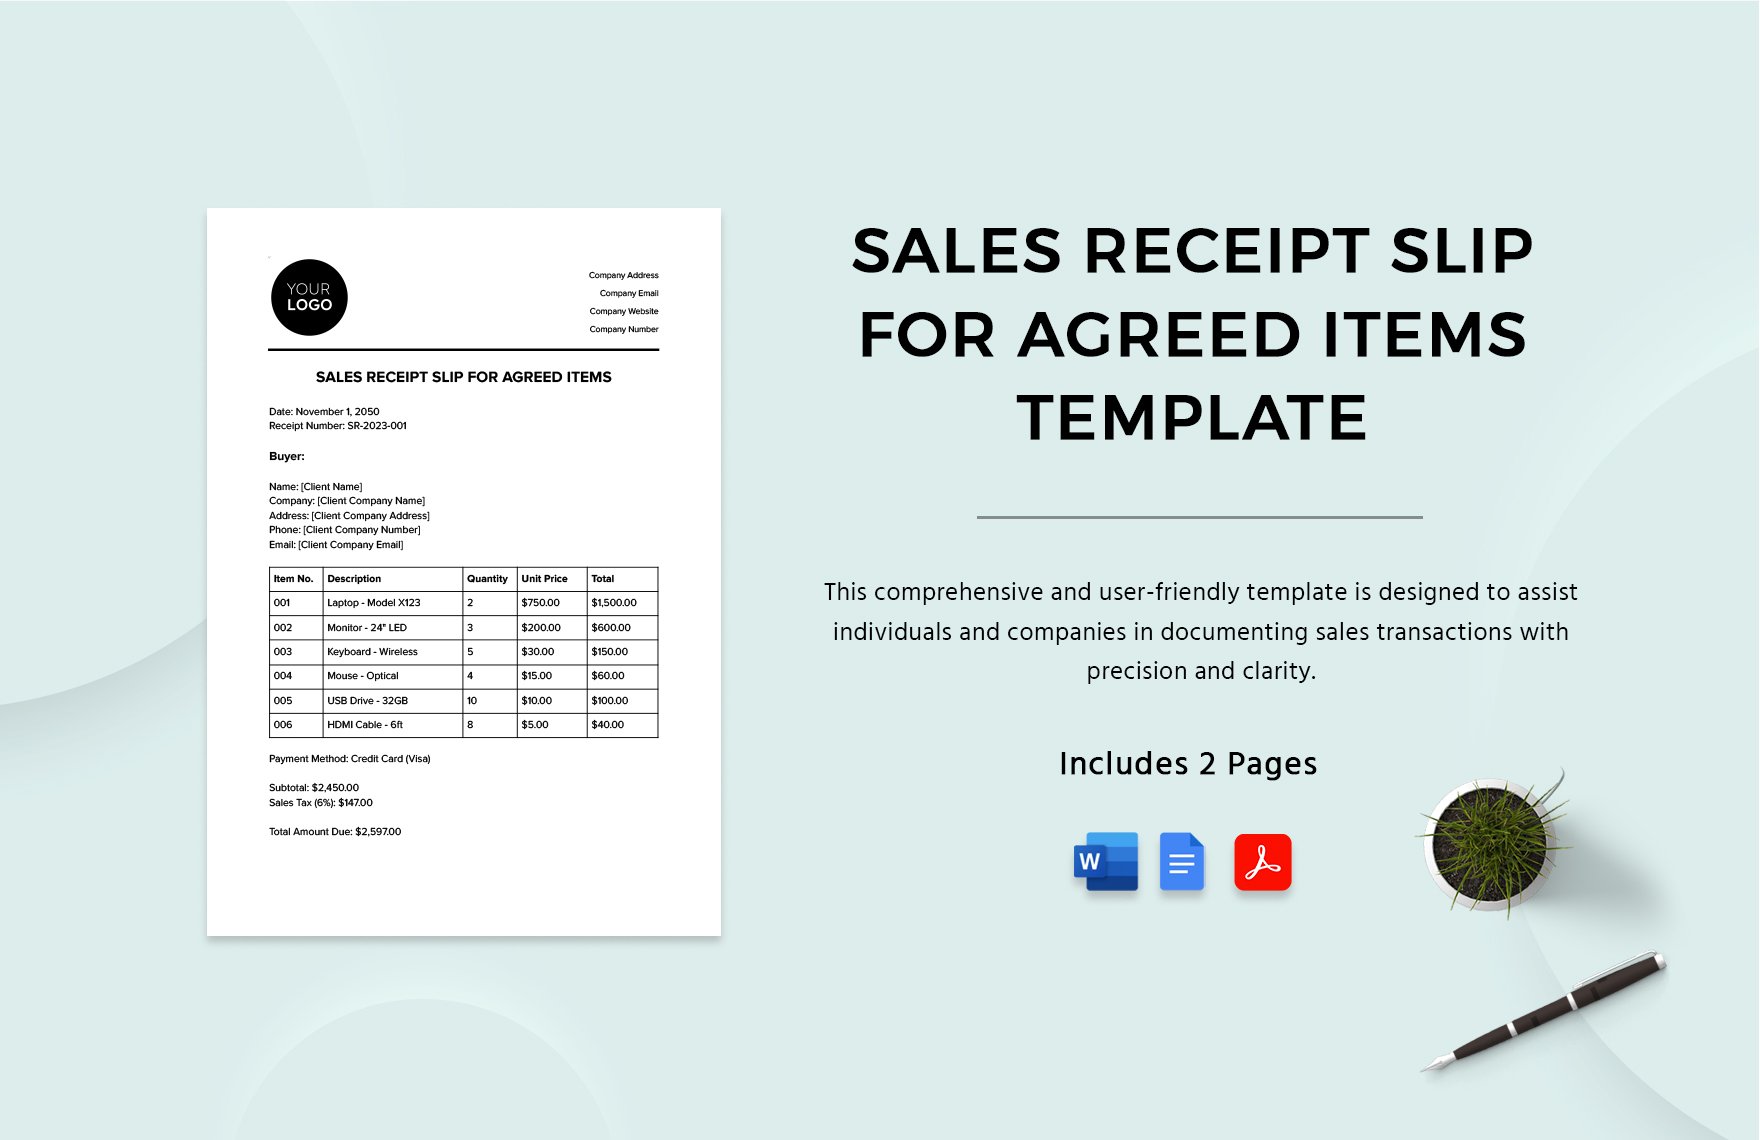 Sales Receipt Slip for Agreed Items Template in Word, Google Docs, PDF